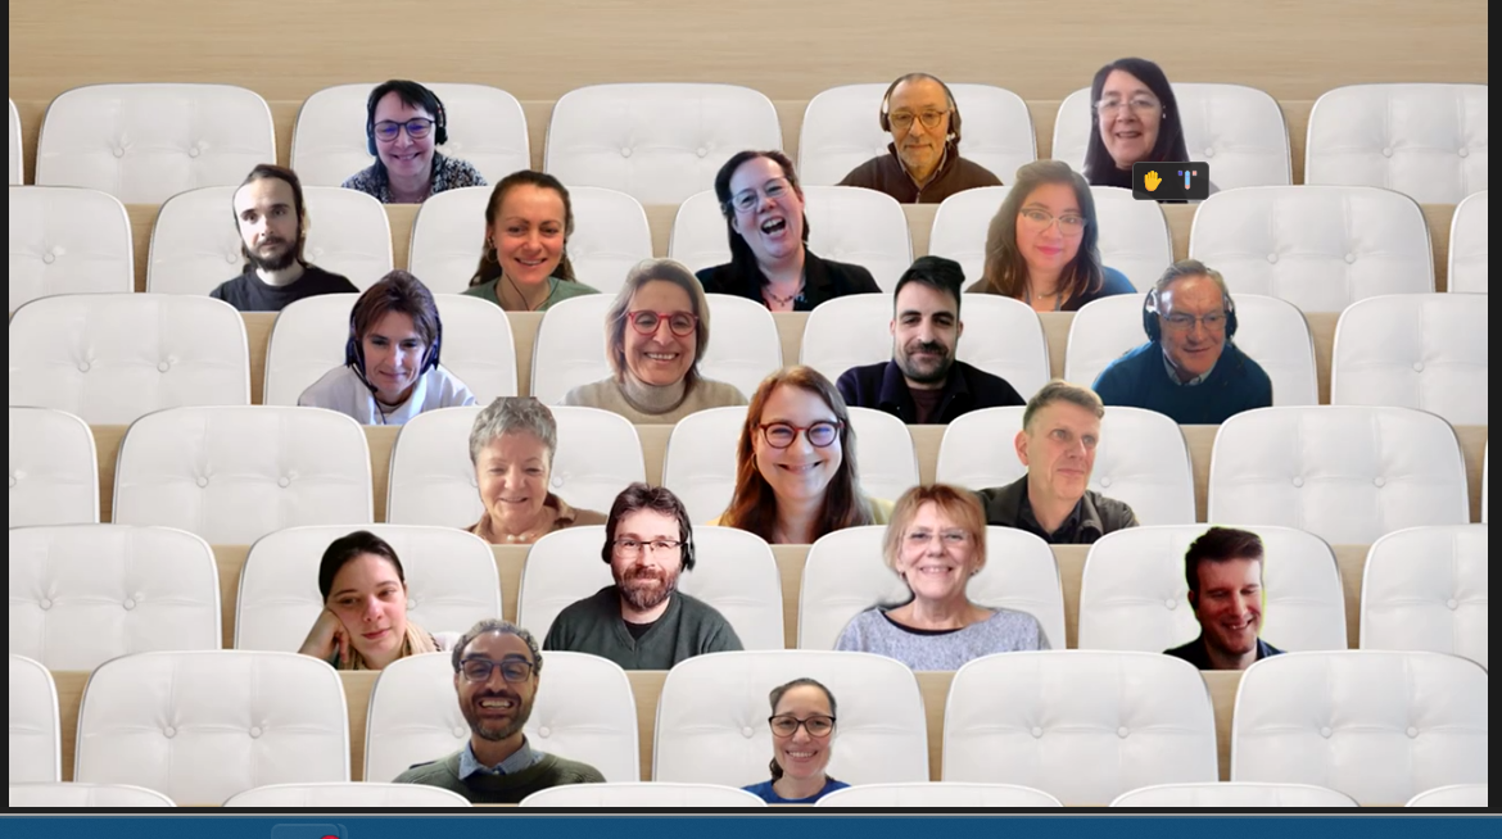 Screenshot from a Teams online video meeting, with the attendances placed as if they were sitting in an auditorium.